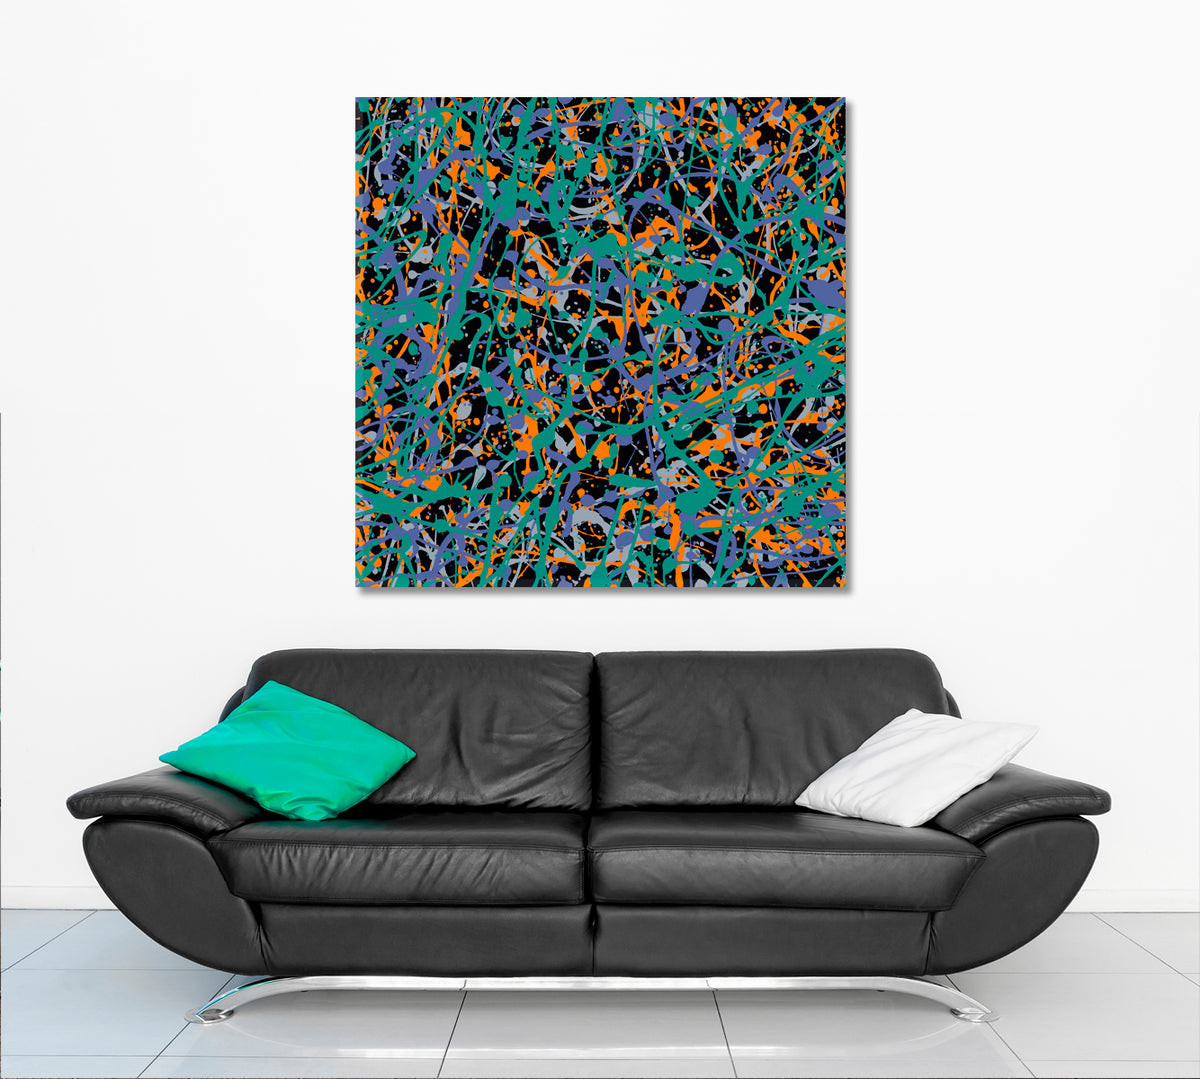 Splatter Art Style of Drip Painting Abstract Expressionism Abstract Art Print Artesty 1 Panel 12"x12" 